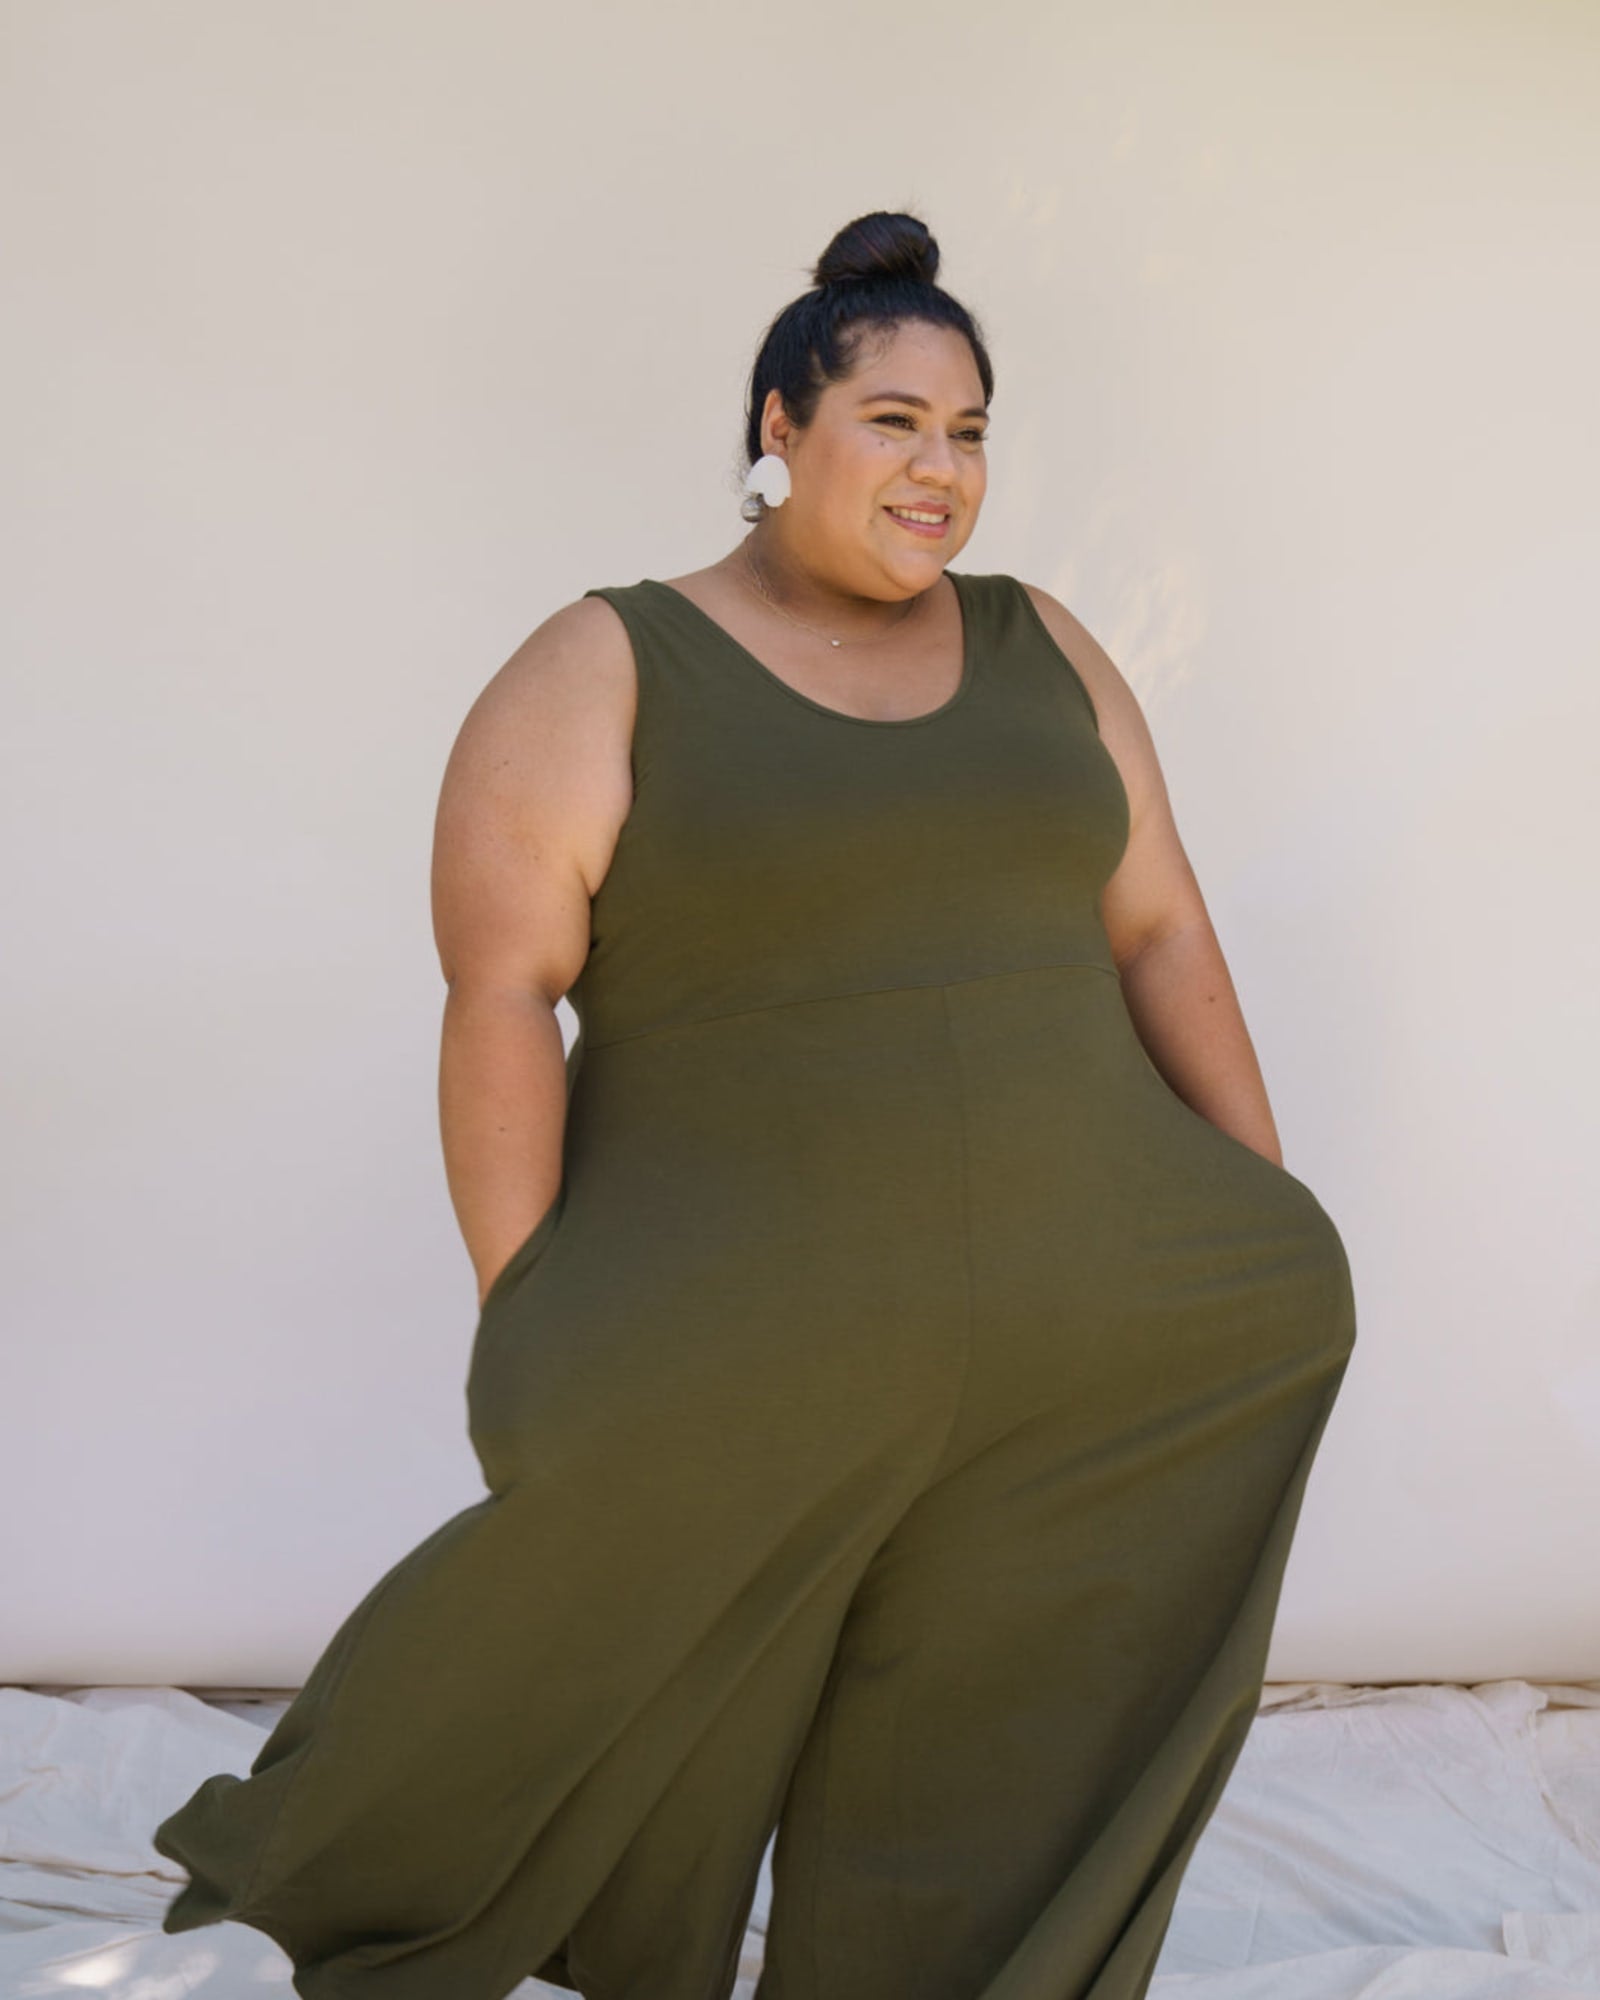 Poetic Justice Plus Size Curvy Women's Olive Green Wide Leg